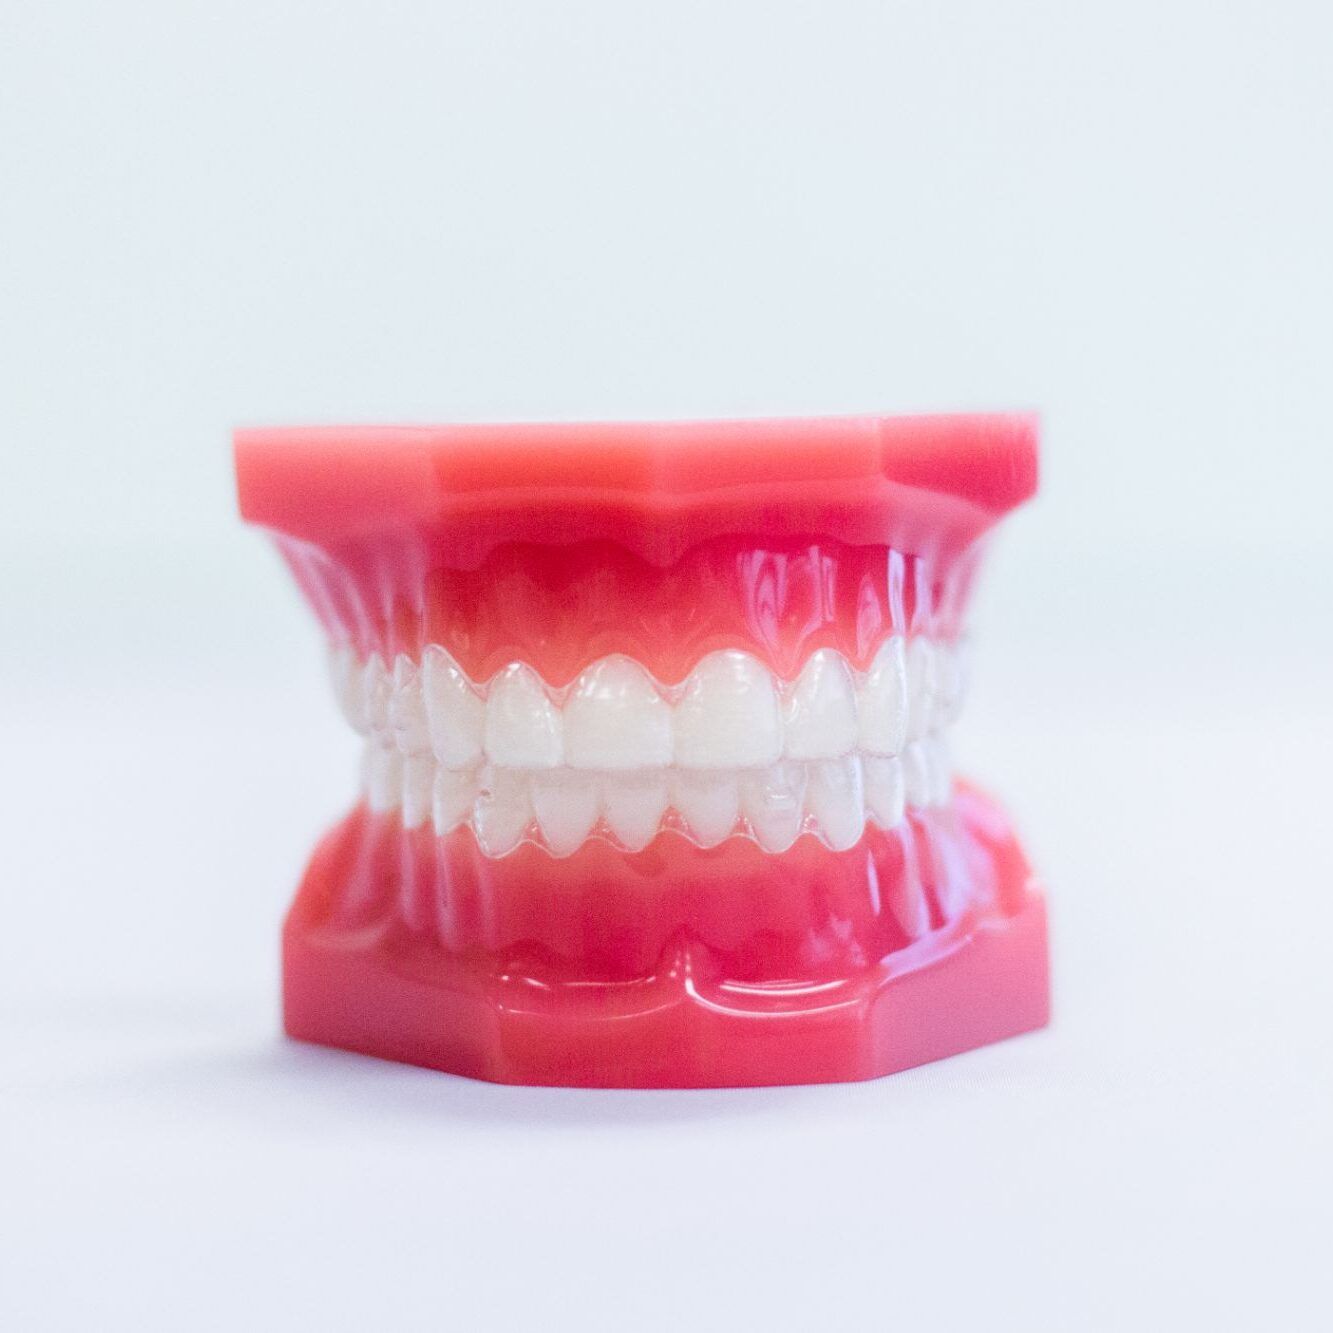 a model of a person 's teeth with white teeth